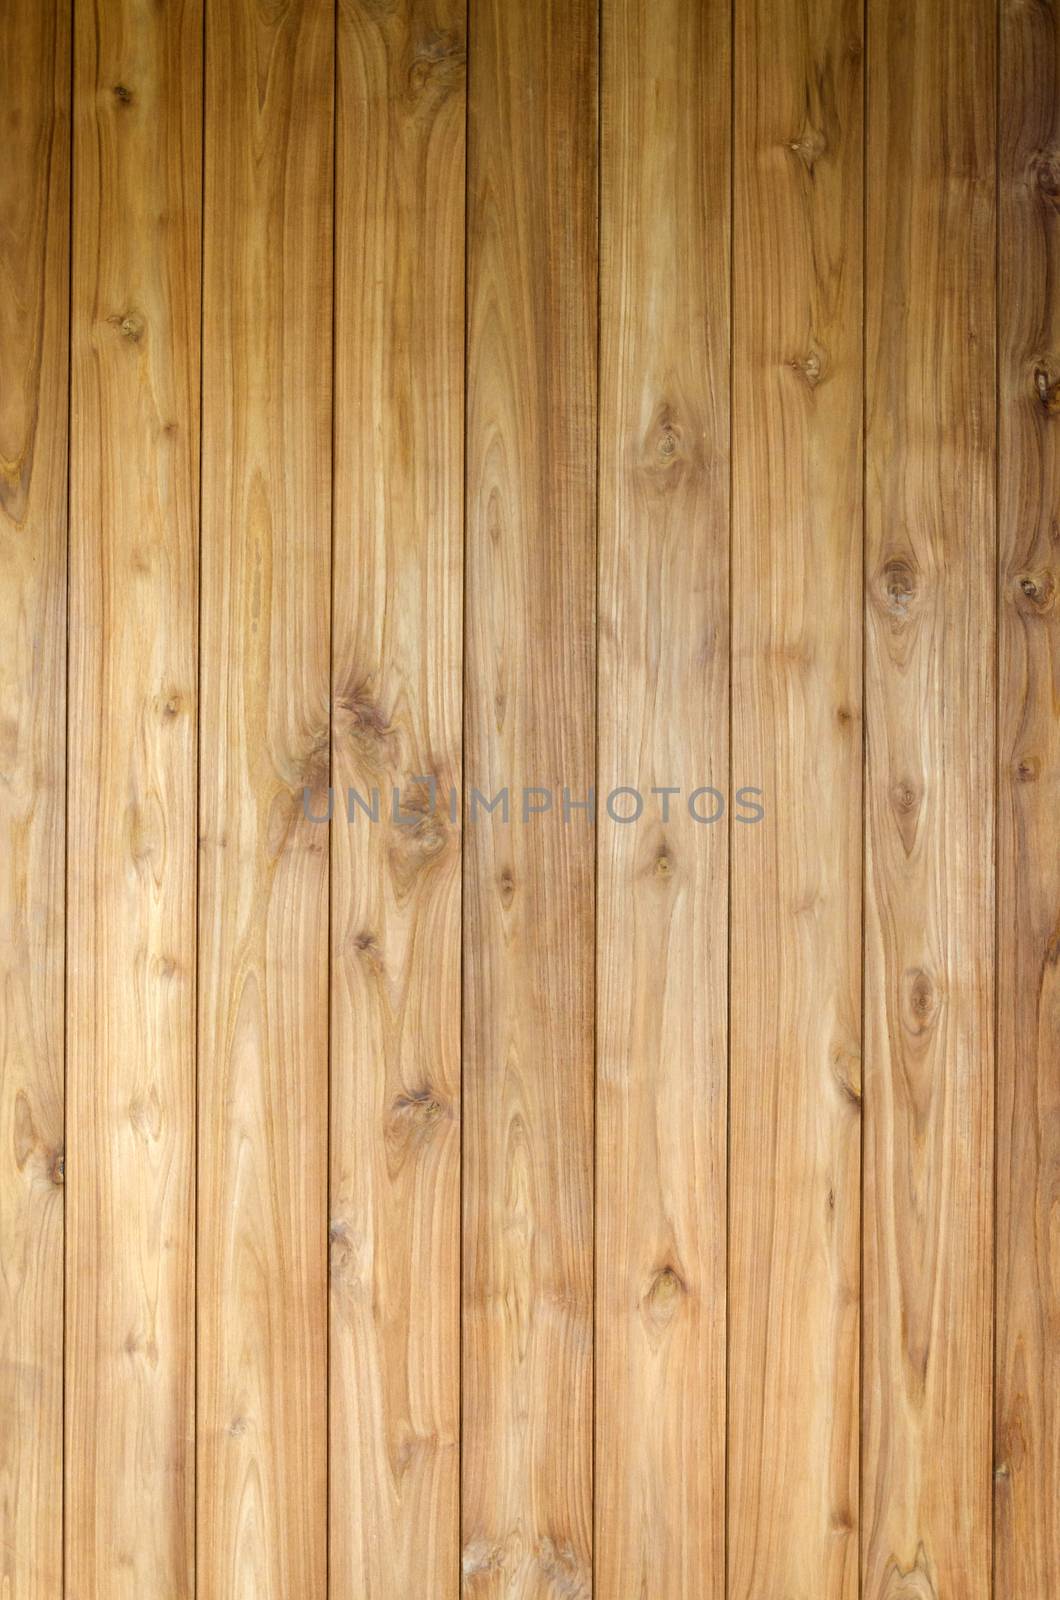 Vertical wooden planks texture for background